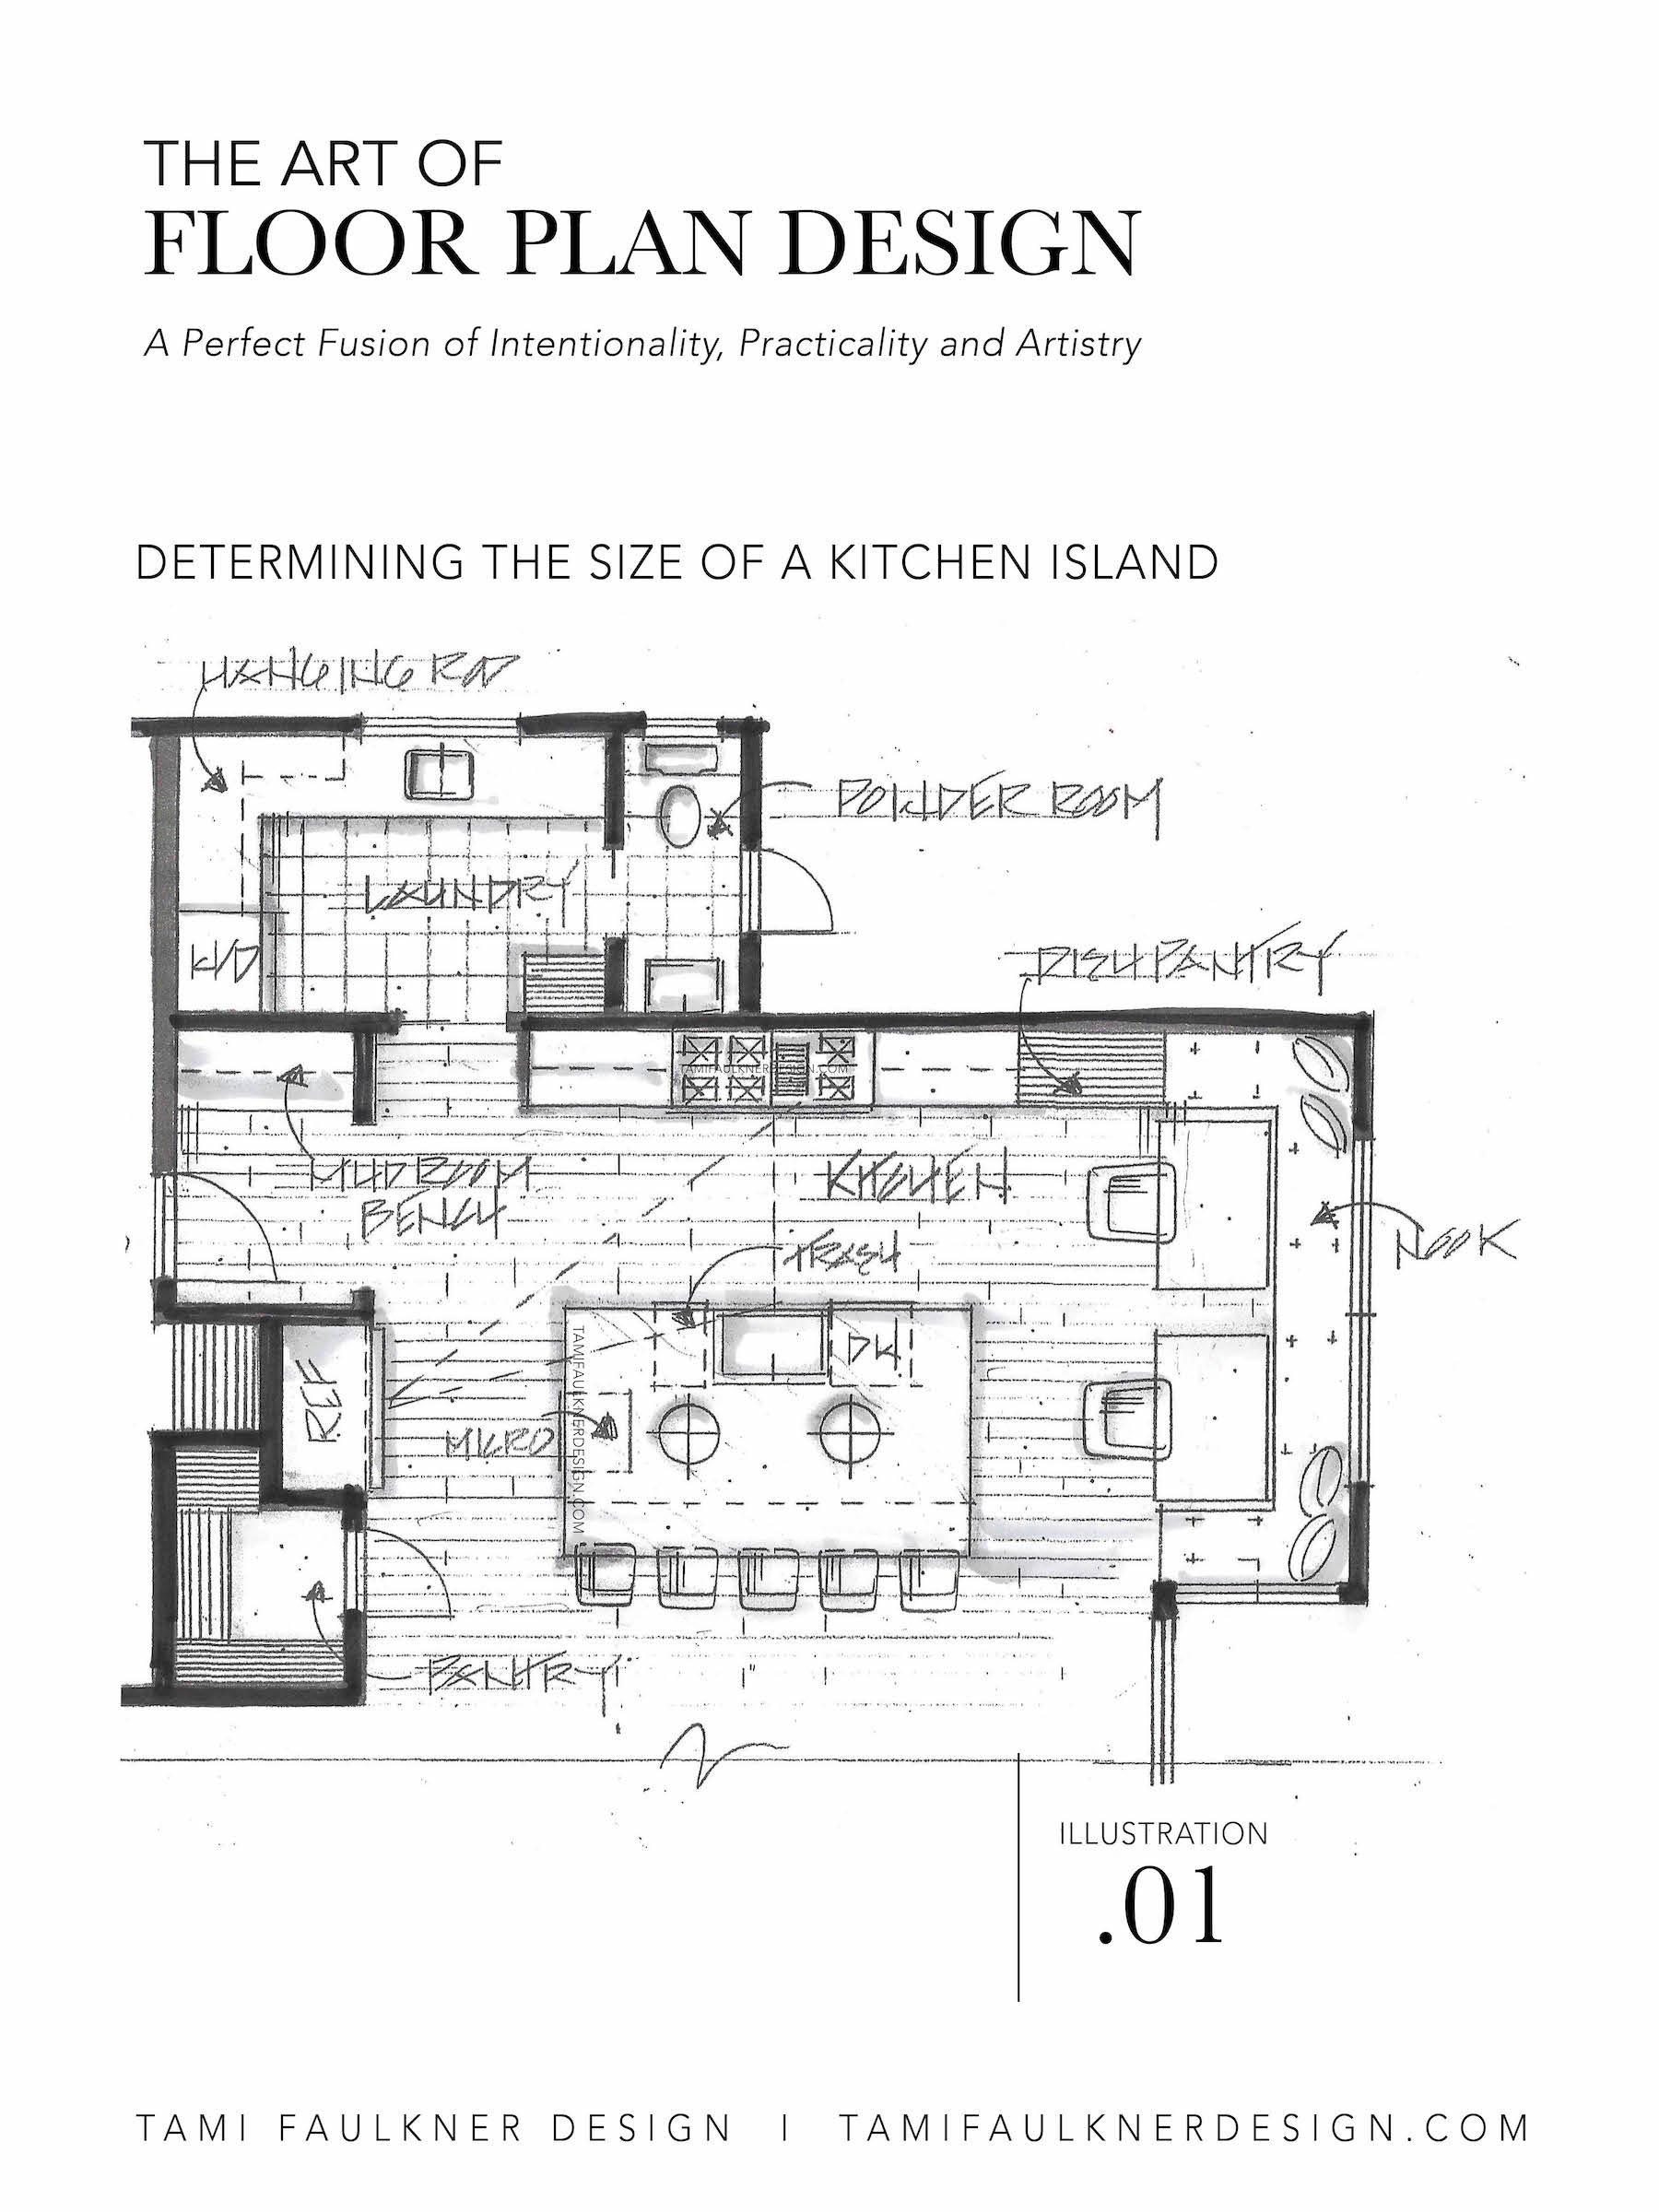 How Wide Kitchen Island Should Be: Optimal Dimensions and Designs